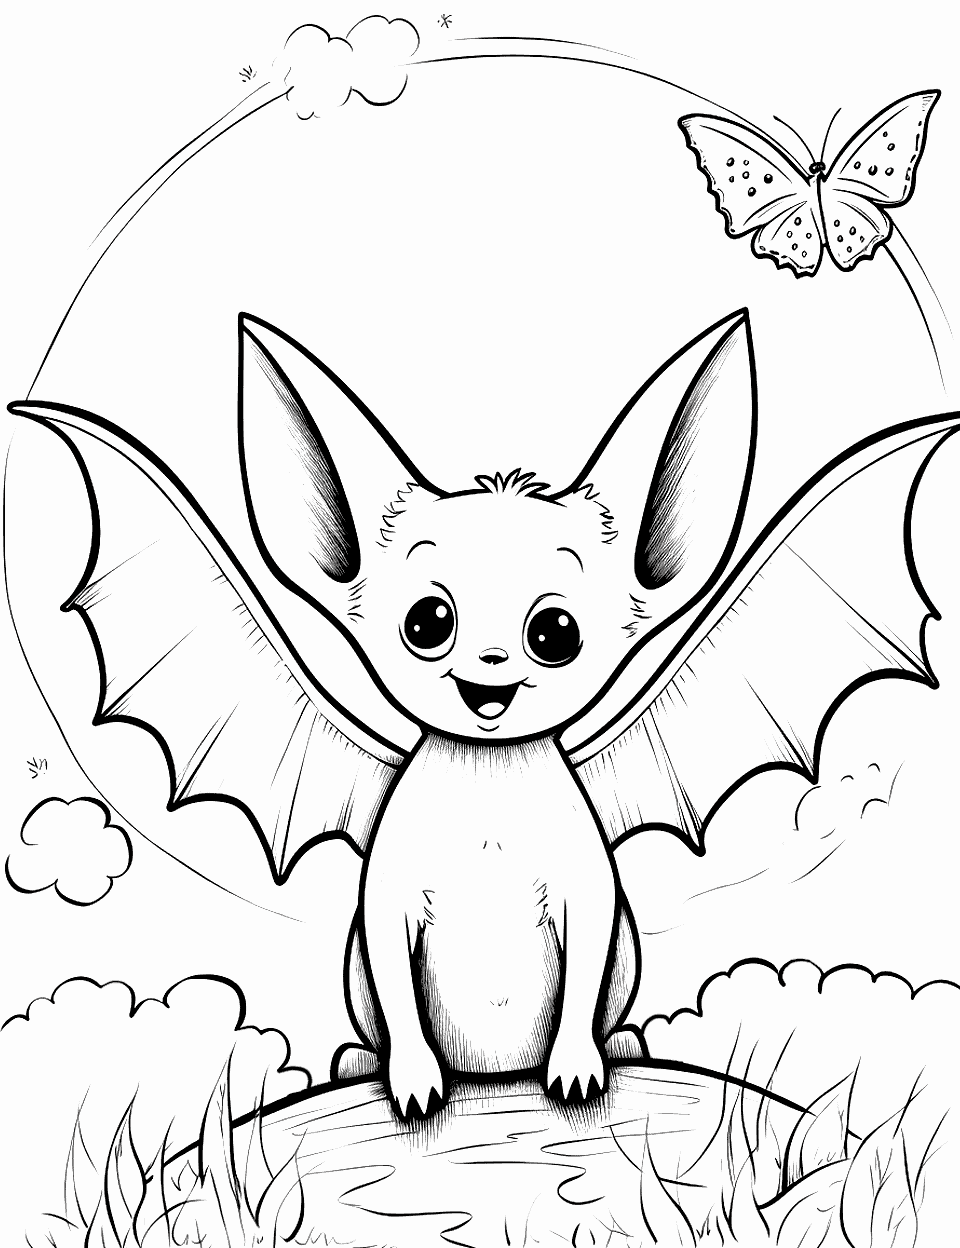 Bat Making Friends with a Butterfly Coloring Page - A bat curiously sits near a butterfly considering making friends.